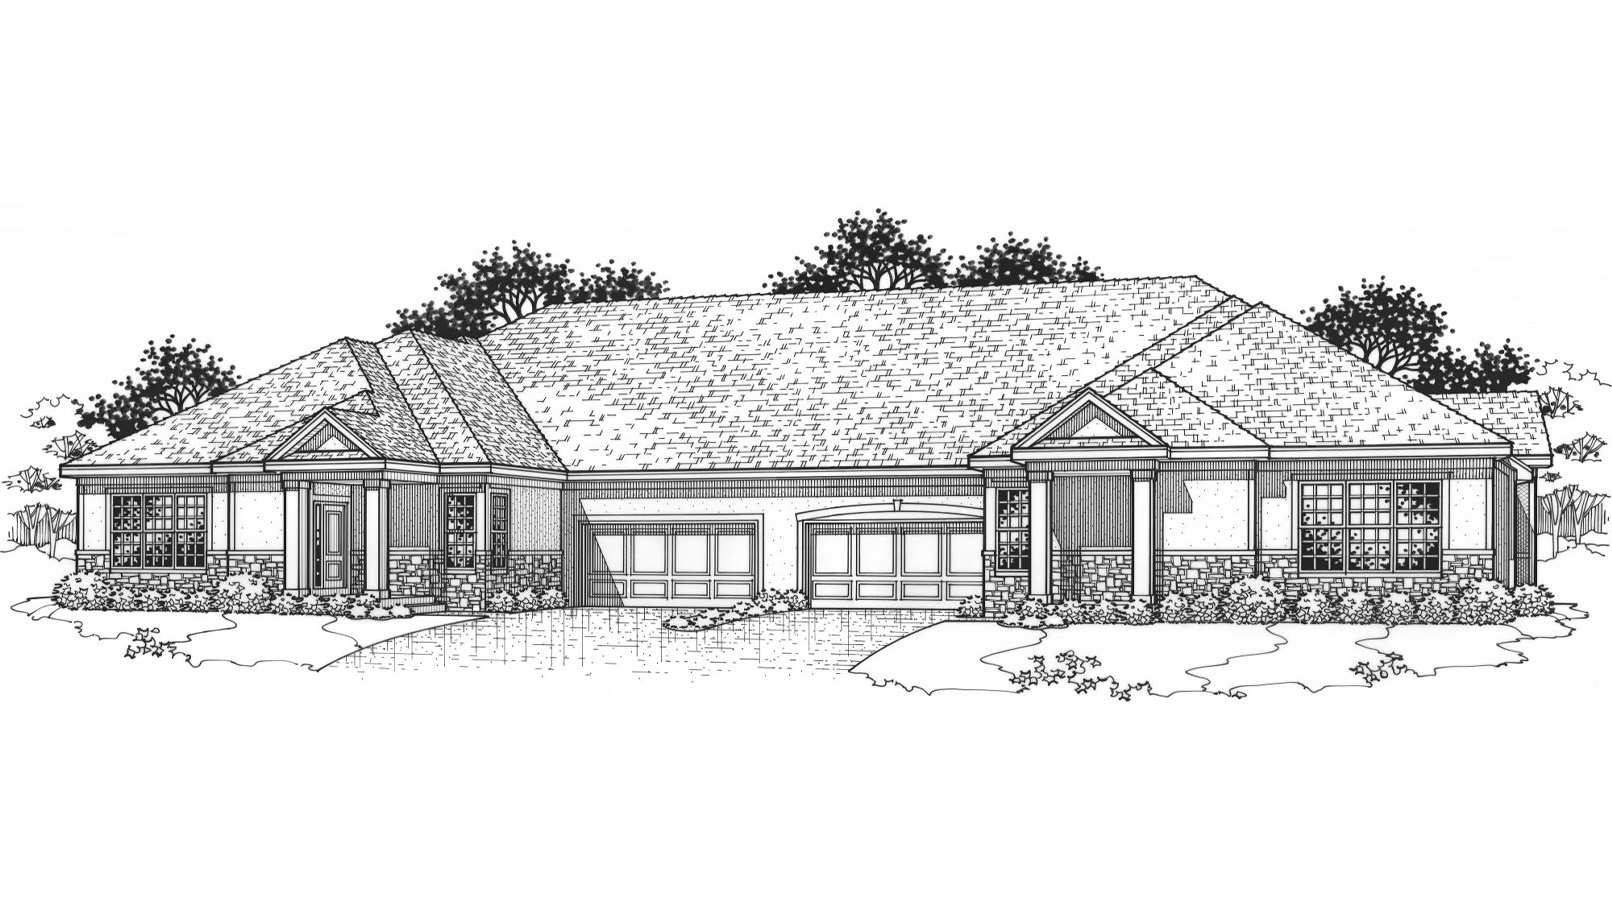 Black and white front elevation of the Minor model from Lambie Homes